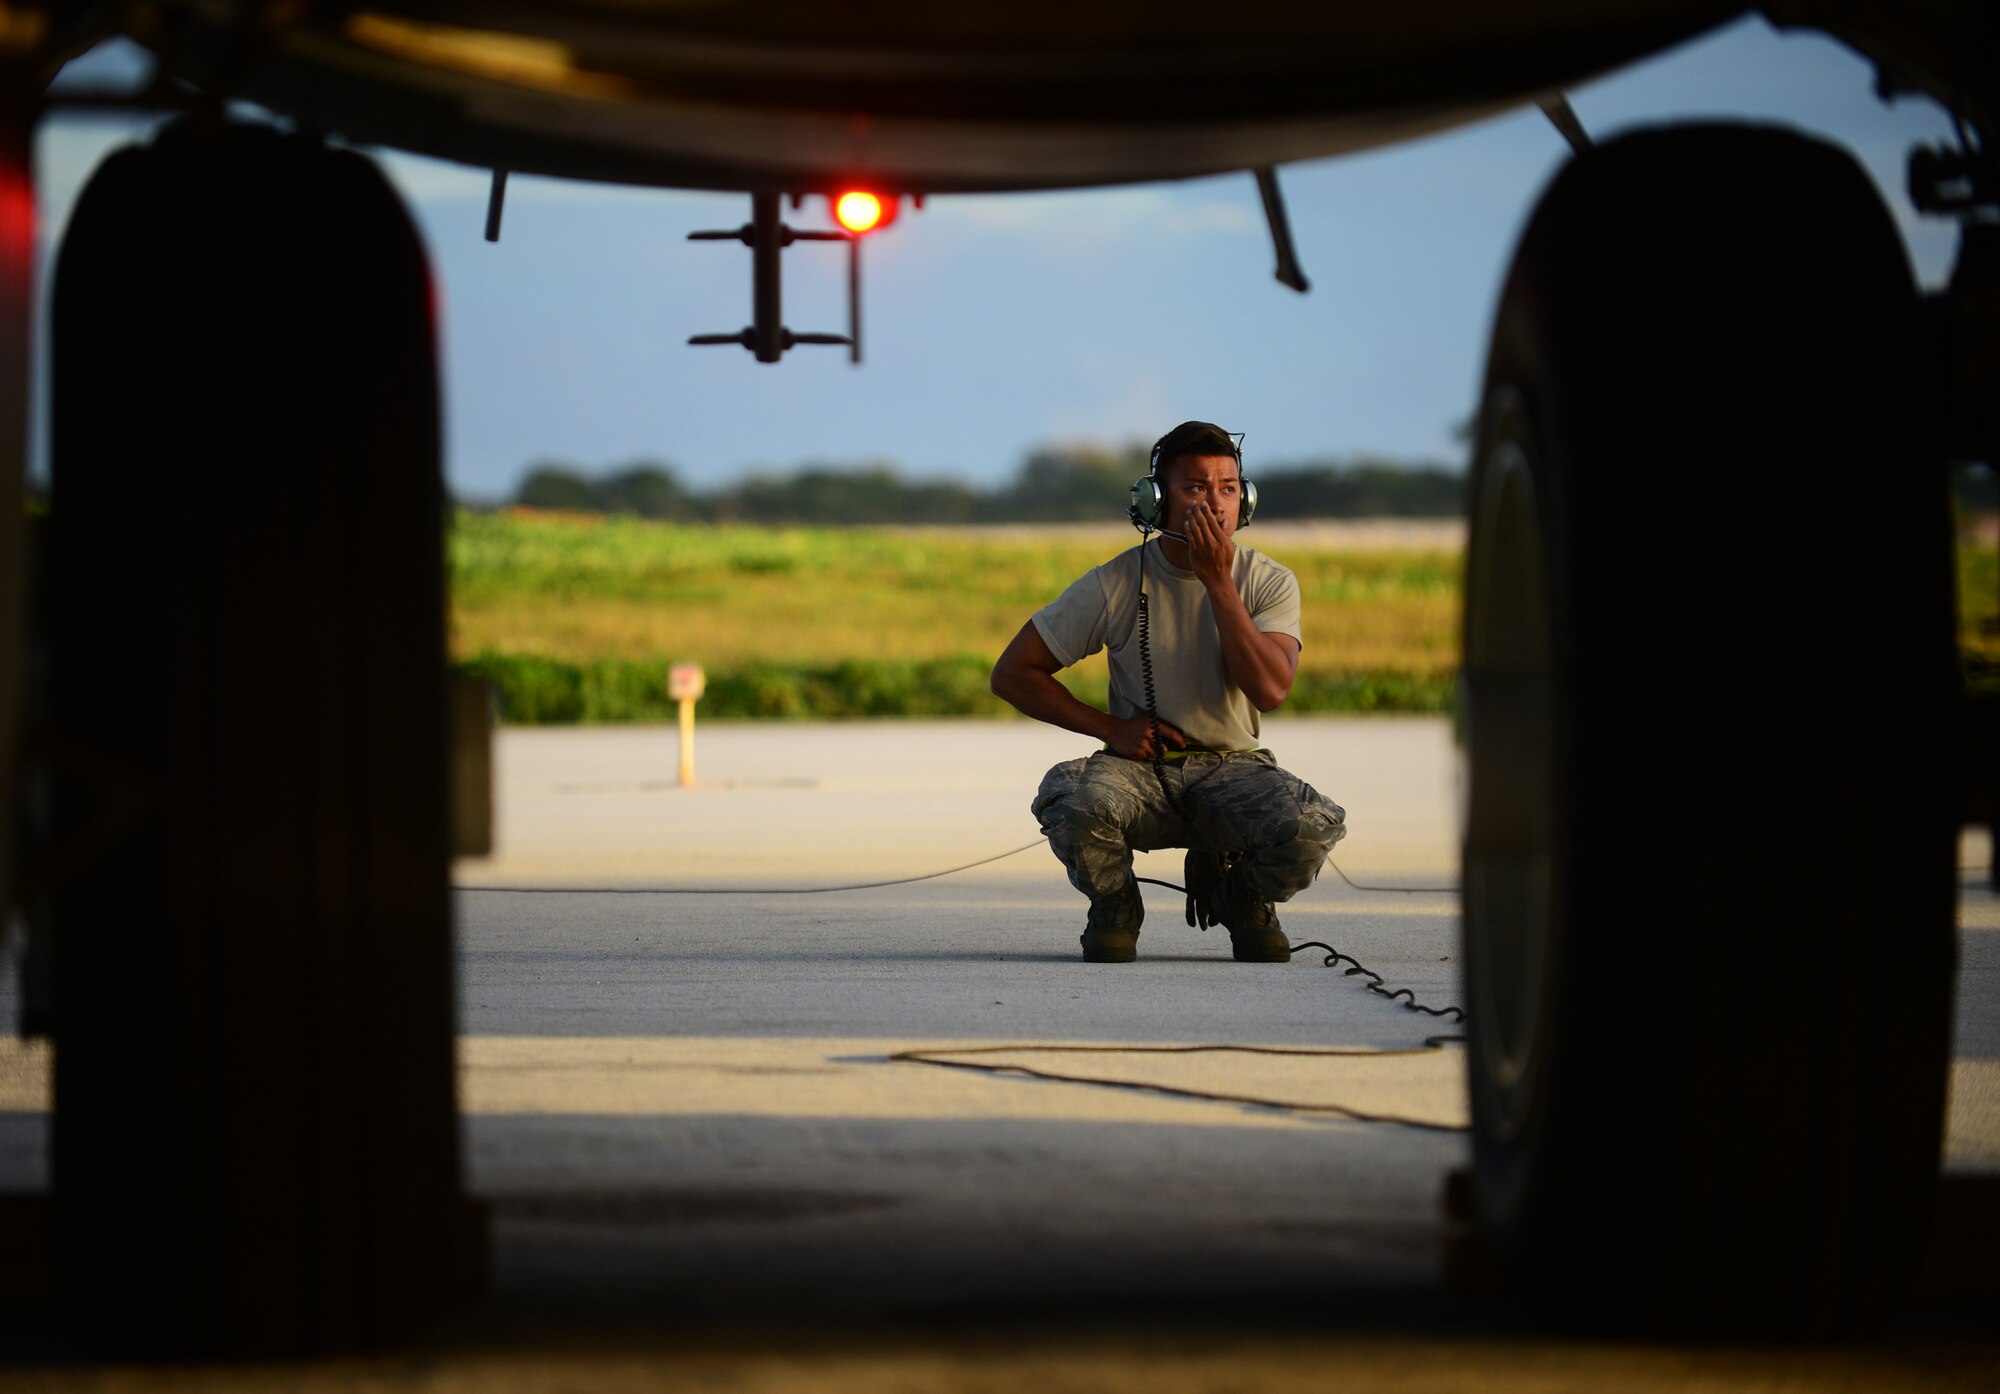 Senior Airman Joeyfel Abayon, 36th Expeditionary Aircraft Maintenance Squadron crew chief, performs a pre-flight inspection on a B-52 Stratofortress March 21, 2016, at Andersen Air Force Base, Guam. The U.S. Pacific Command has maintained a rotational strategic bomber presence in the Indo-Asia-Pacific region for more than a decade. (U.S. Air Force photo by Senior Airman Joshua Smoot/Released)